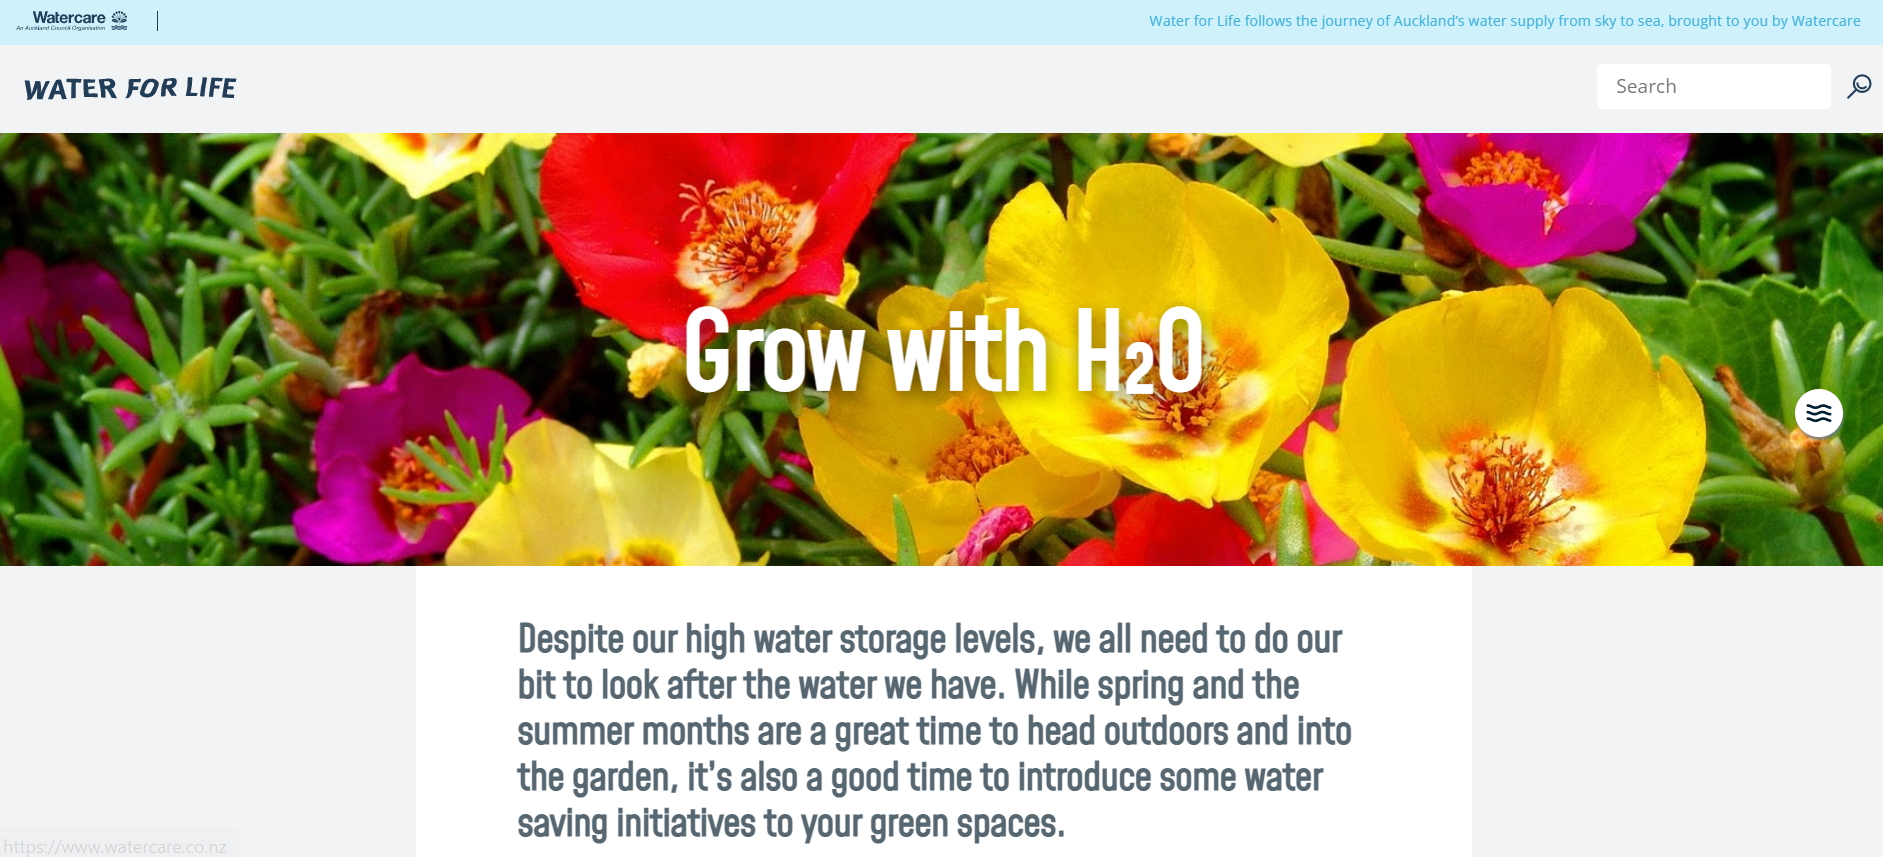 Water for Life website